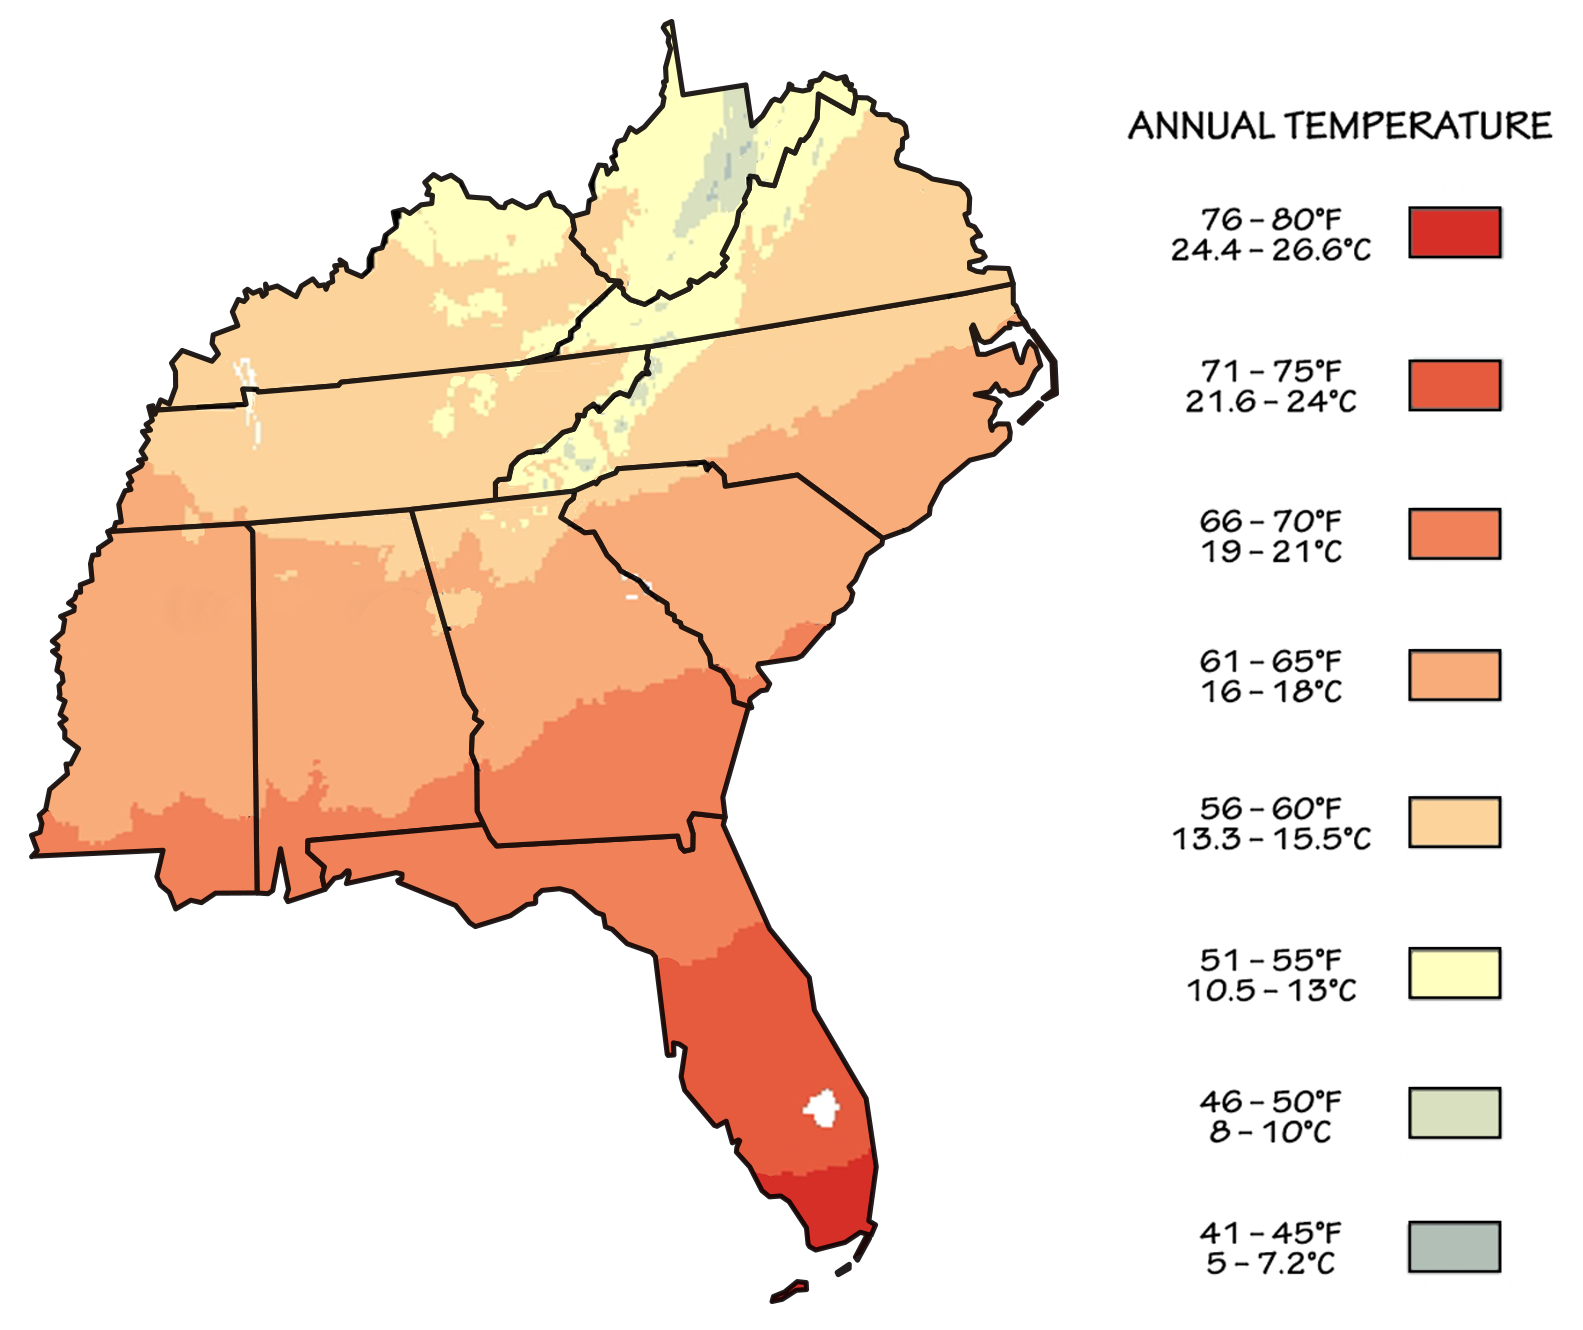 Map of the southeastern United States color-coded to show zones with different average annual temperatures. Average temperature increases southward.